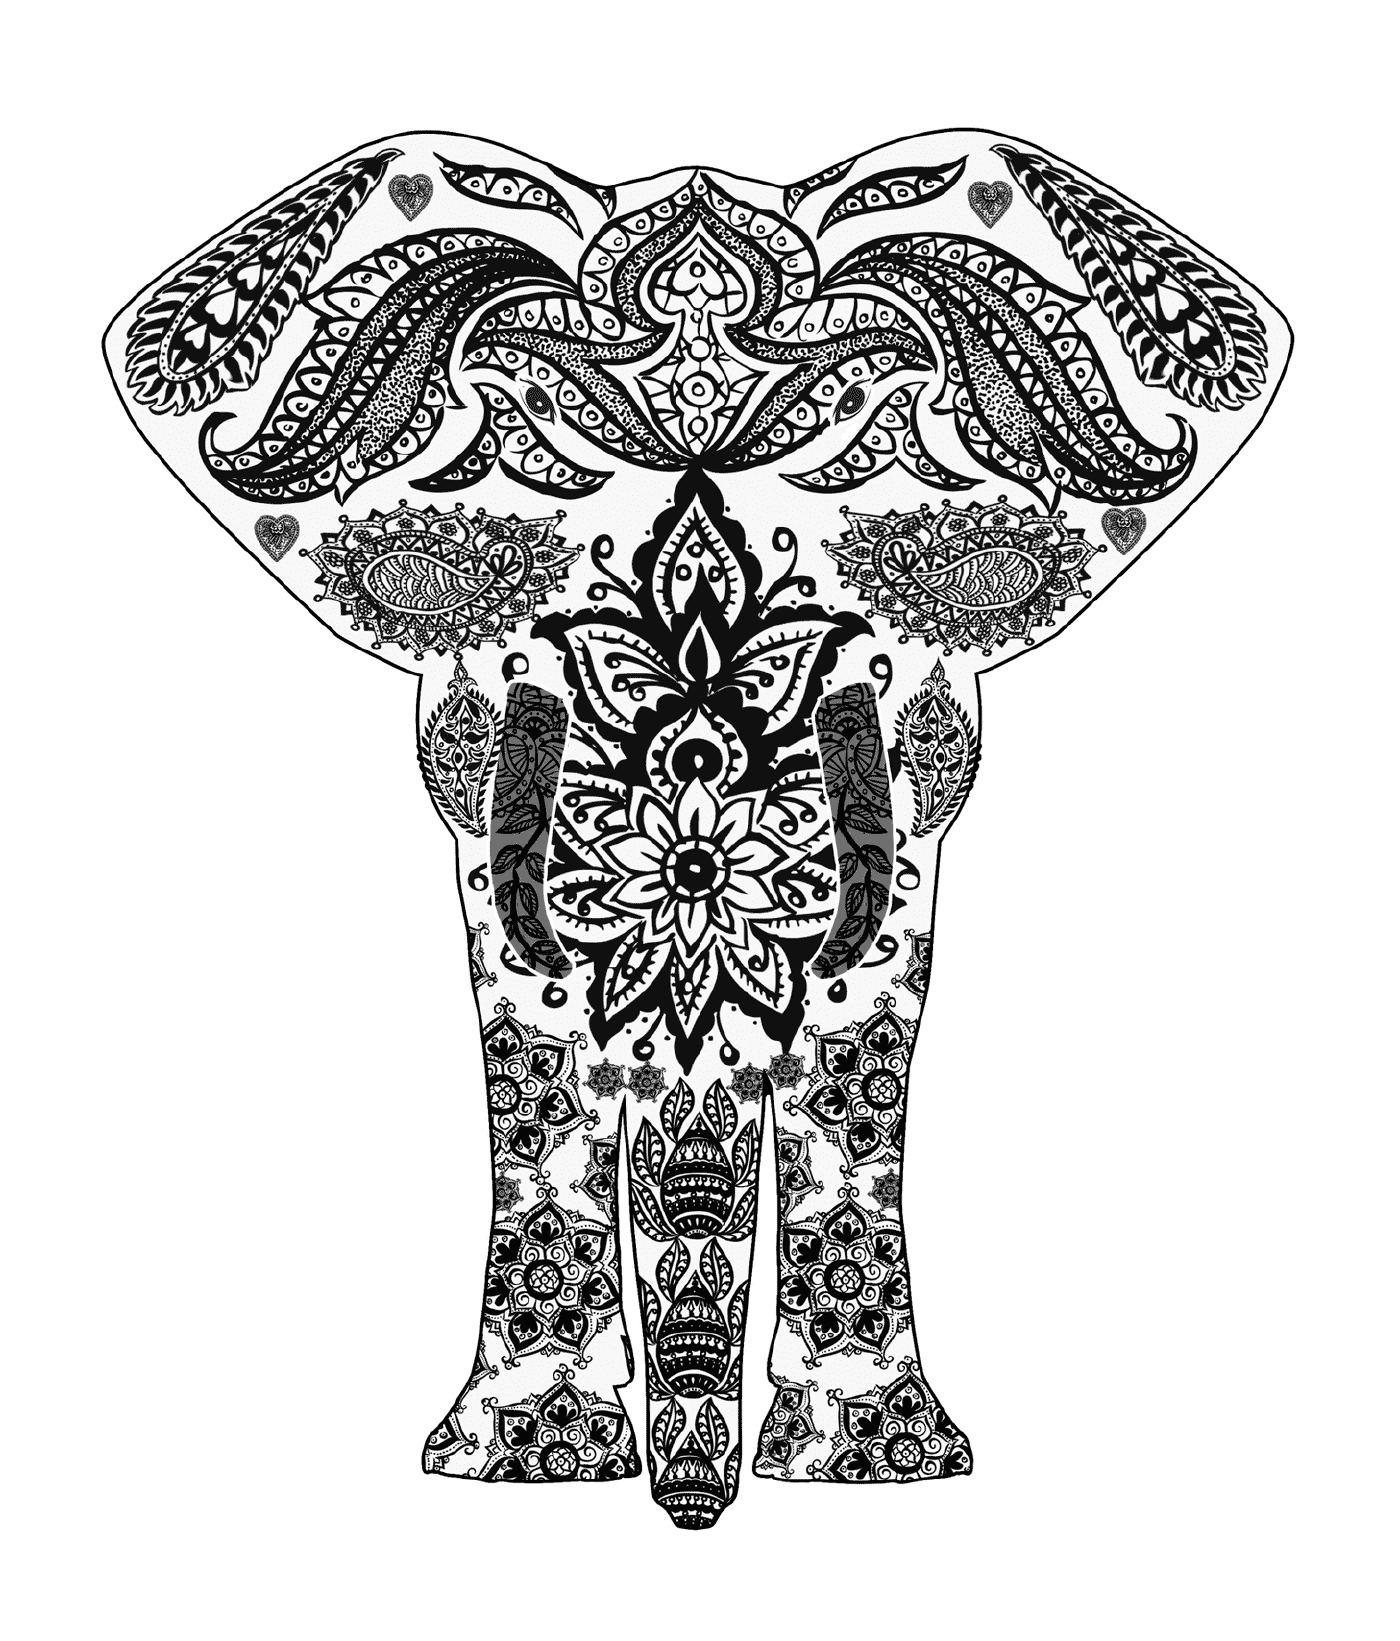  Elephant with complex patterns 